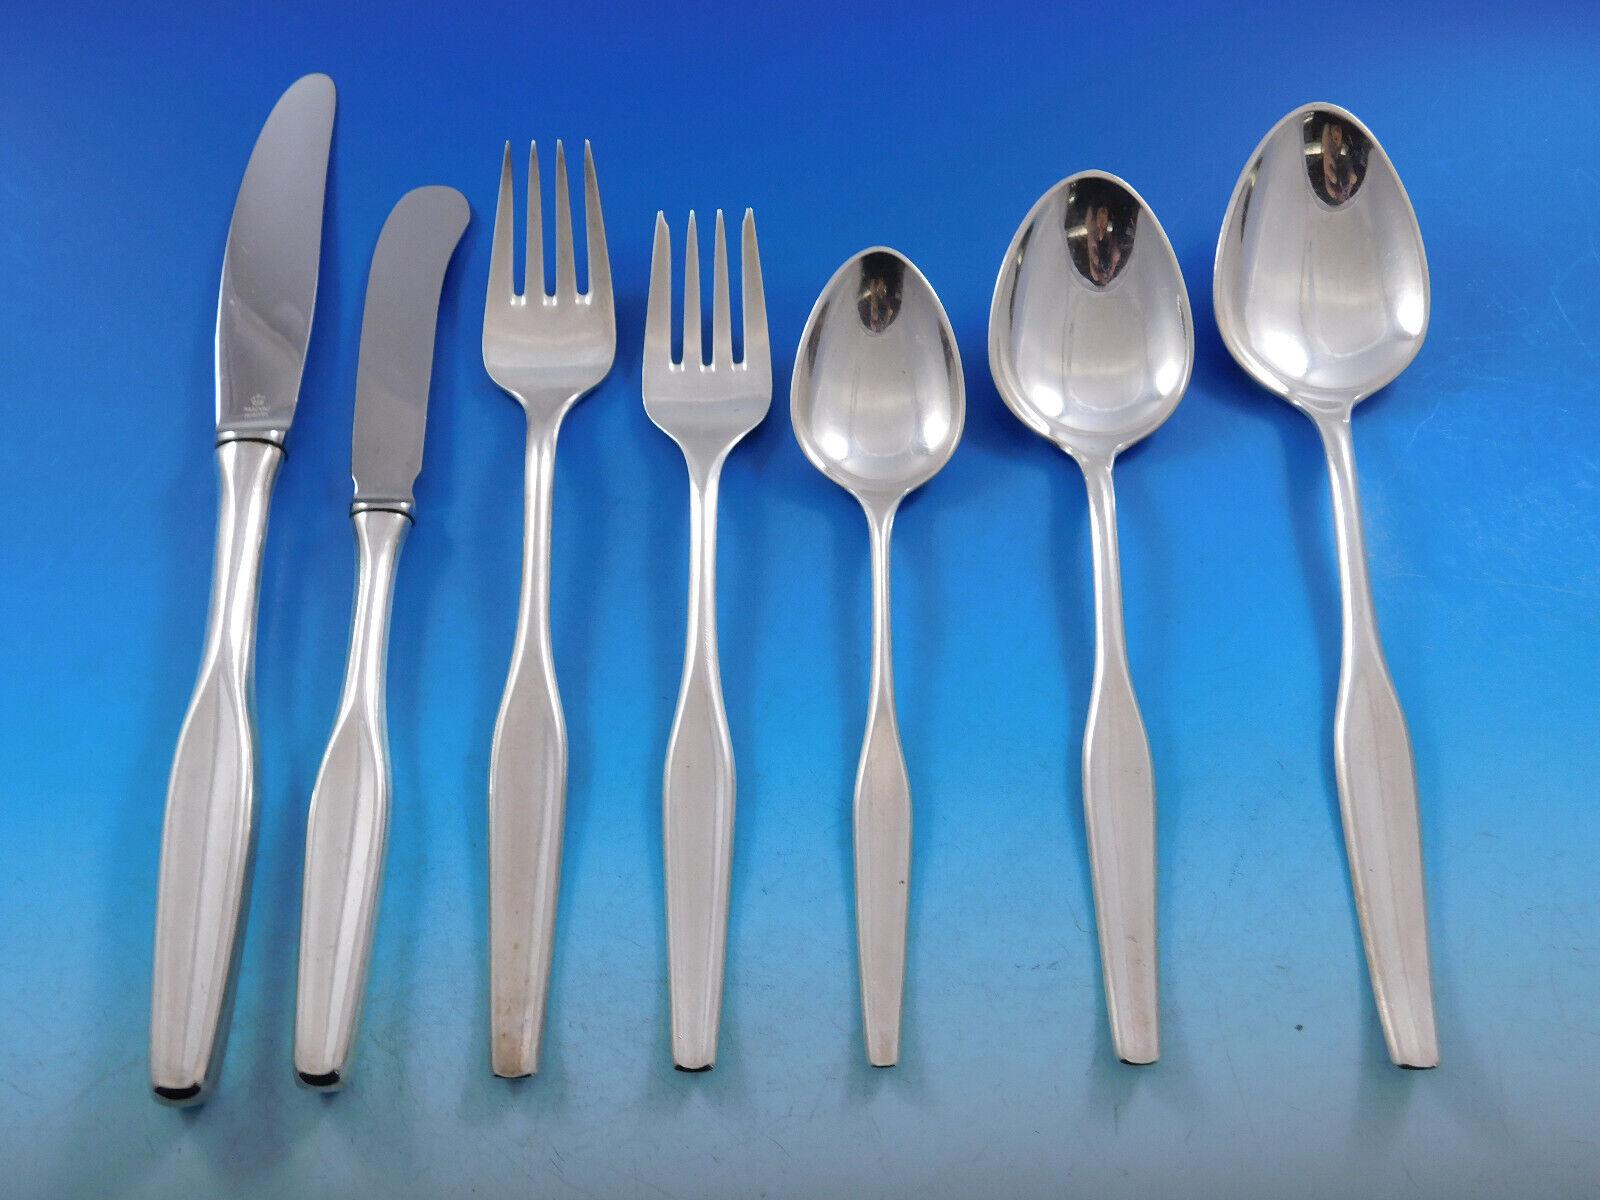 S. Christian Fogh, a Danish silversmith, operated a workshop in Copenhagen, Denmark, from 1947-1973. He was known for his unique jewelry and flatware creations.

Palace by Fogh of Denmark, circa 1950, Sterling Silver Flatware set - 88 pieces. This